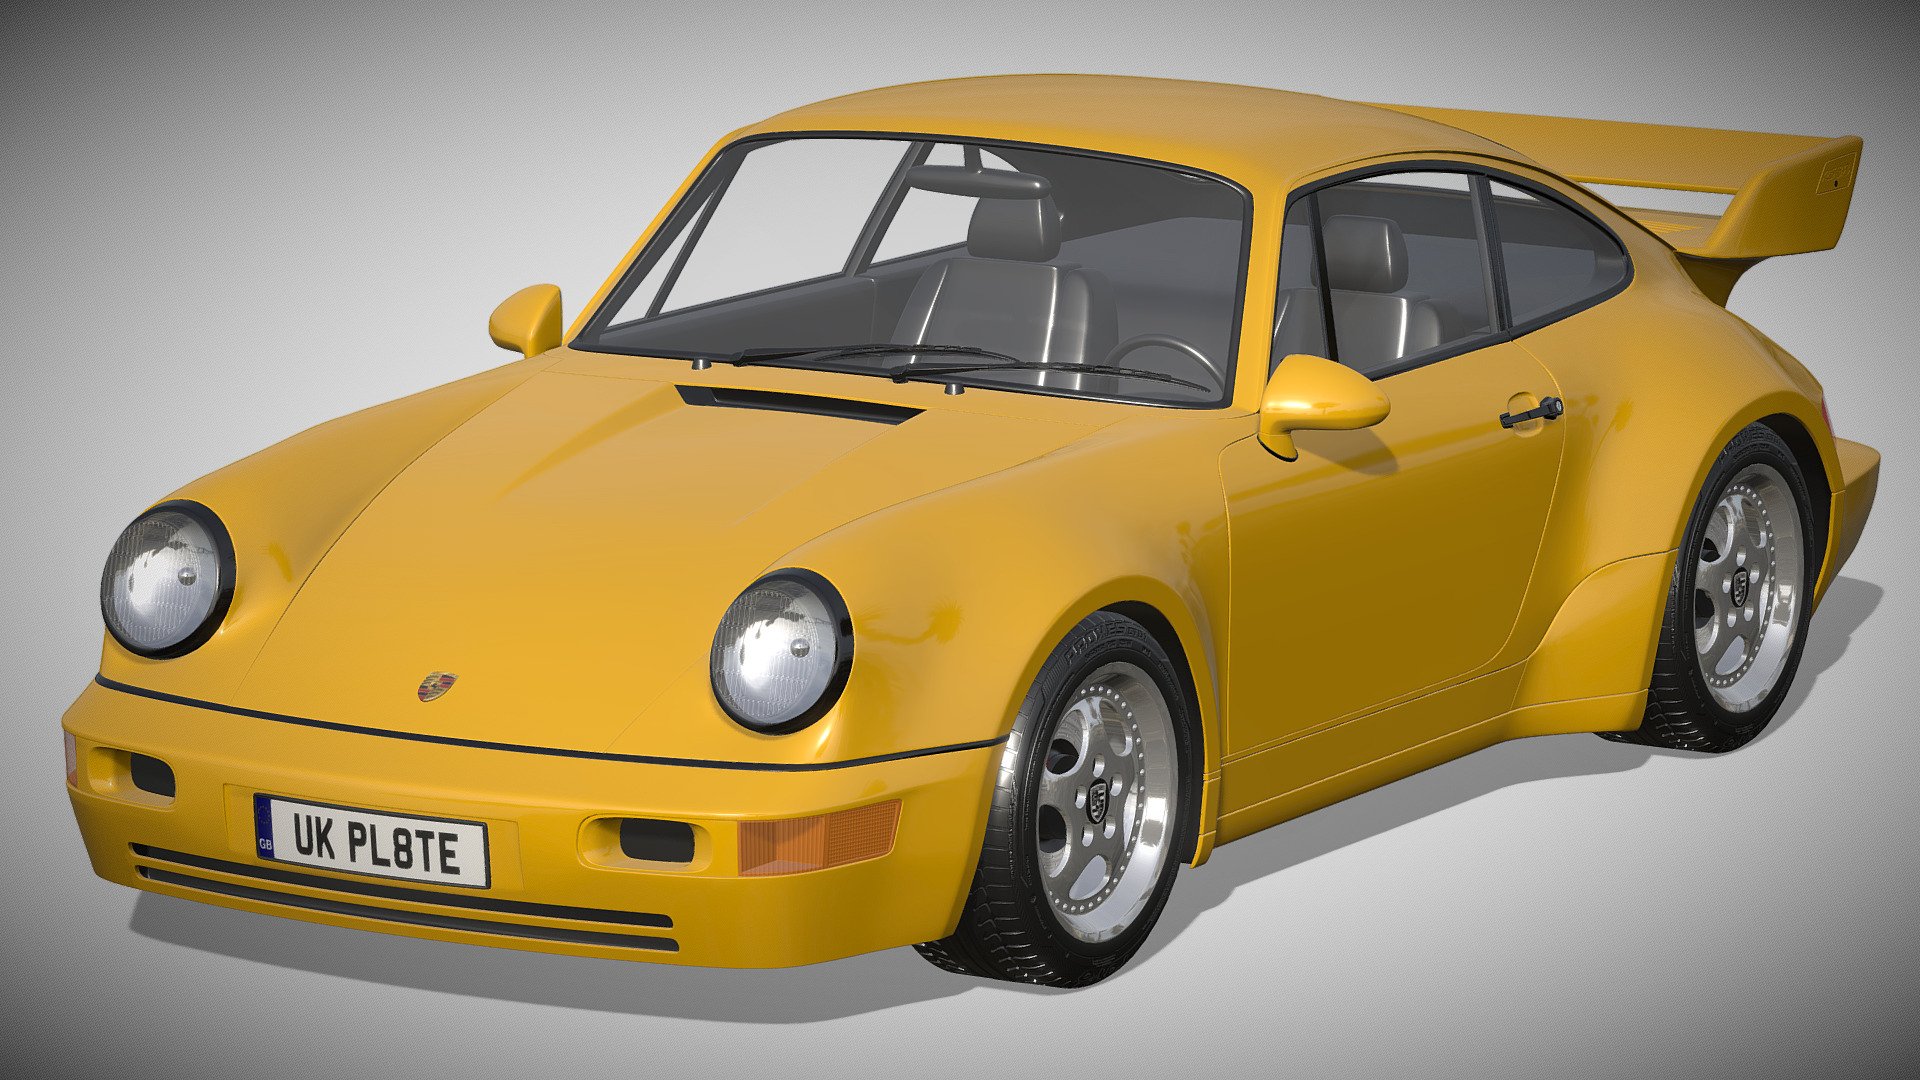 Porsche 911 3.8 Carrera RS (964)

https://supercarnostalgia.com/blog/porsche-911-964-38-carrera-rs

Clean geometry Light weight model, yet completely detailed for HI-Res renders. Use for movies, Advertisements or games

Corona render and materials

All textures include in *.rar files

Lighting setup is not included in the file! - Porsche 911 Carrera RS 964 - Buy Royalty Free 3D model by zifir3d 3d model